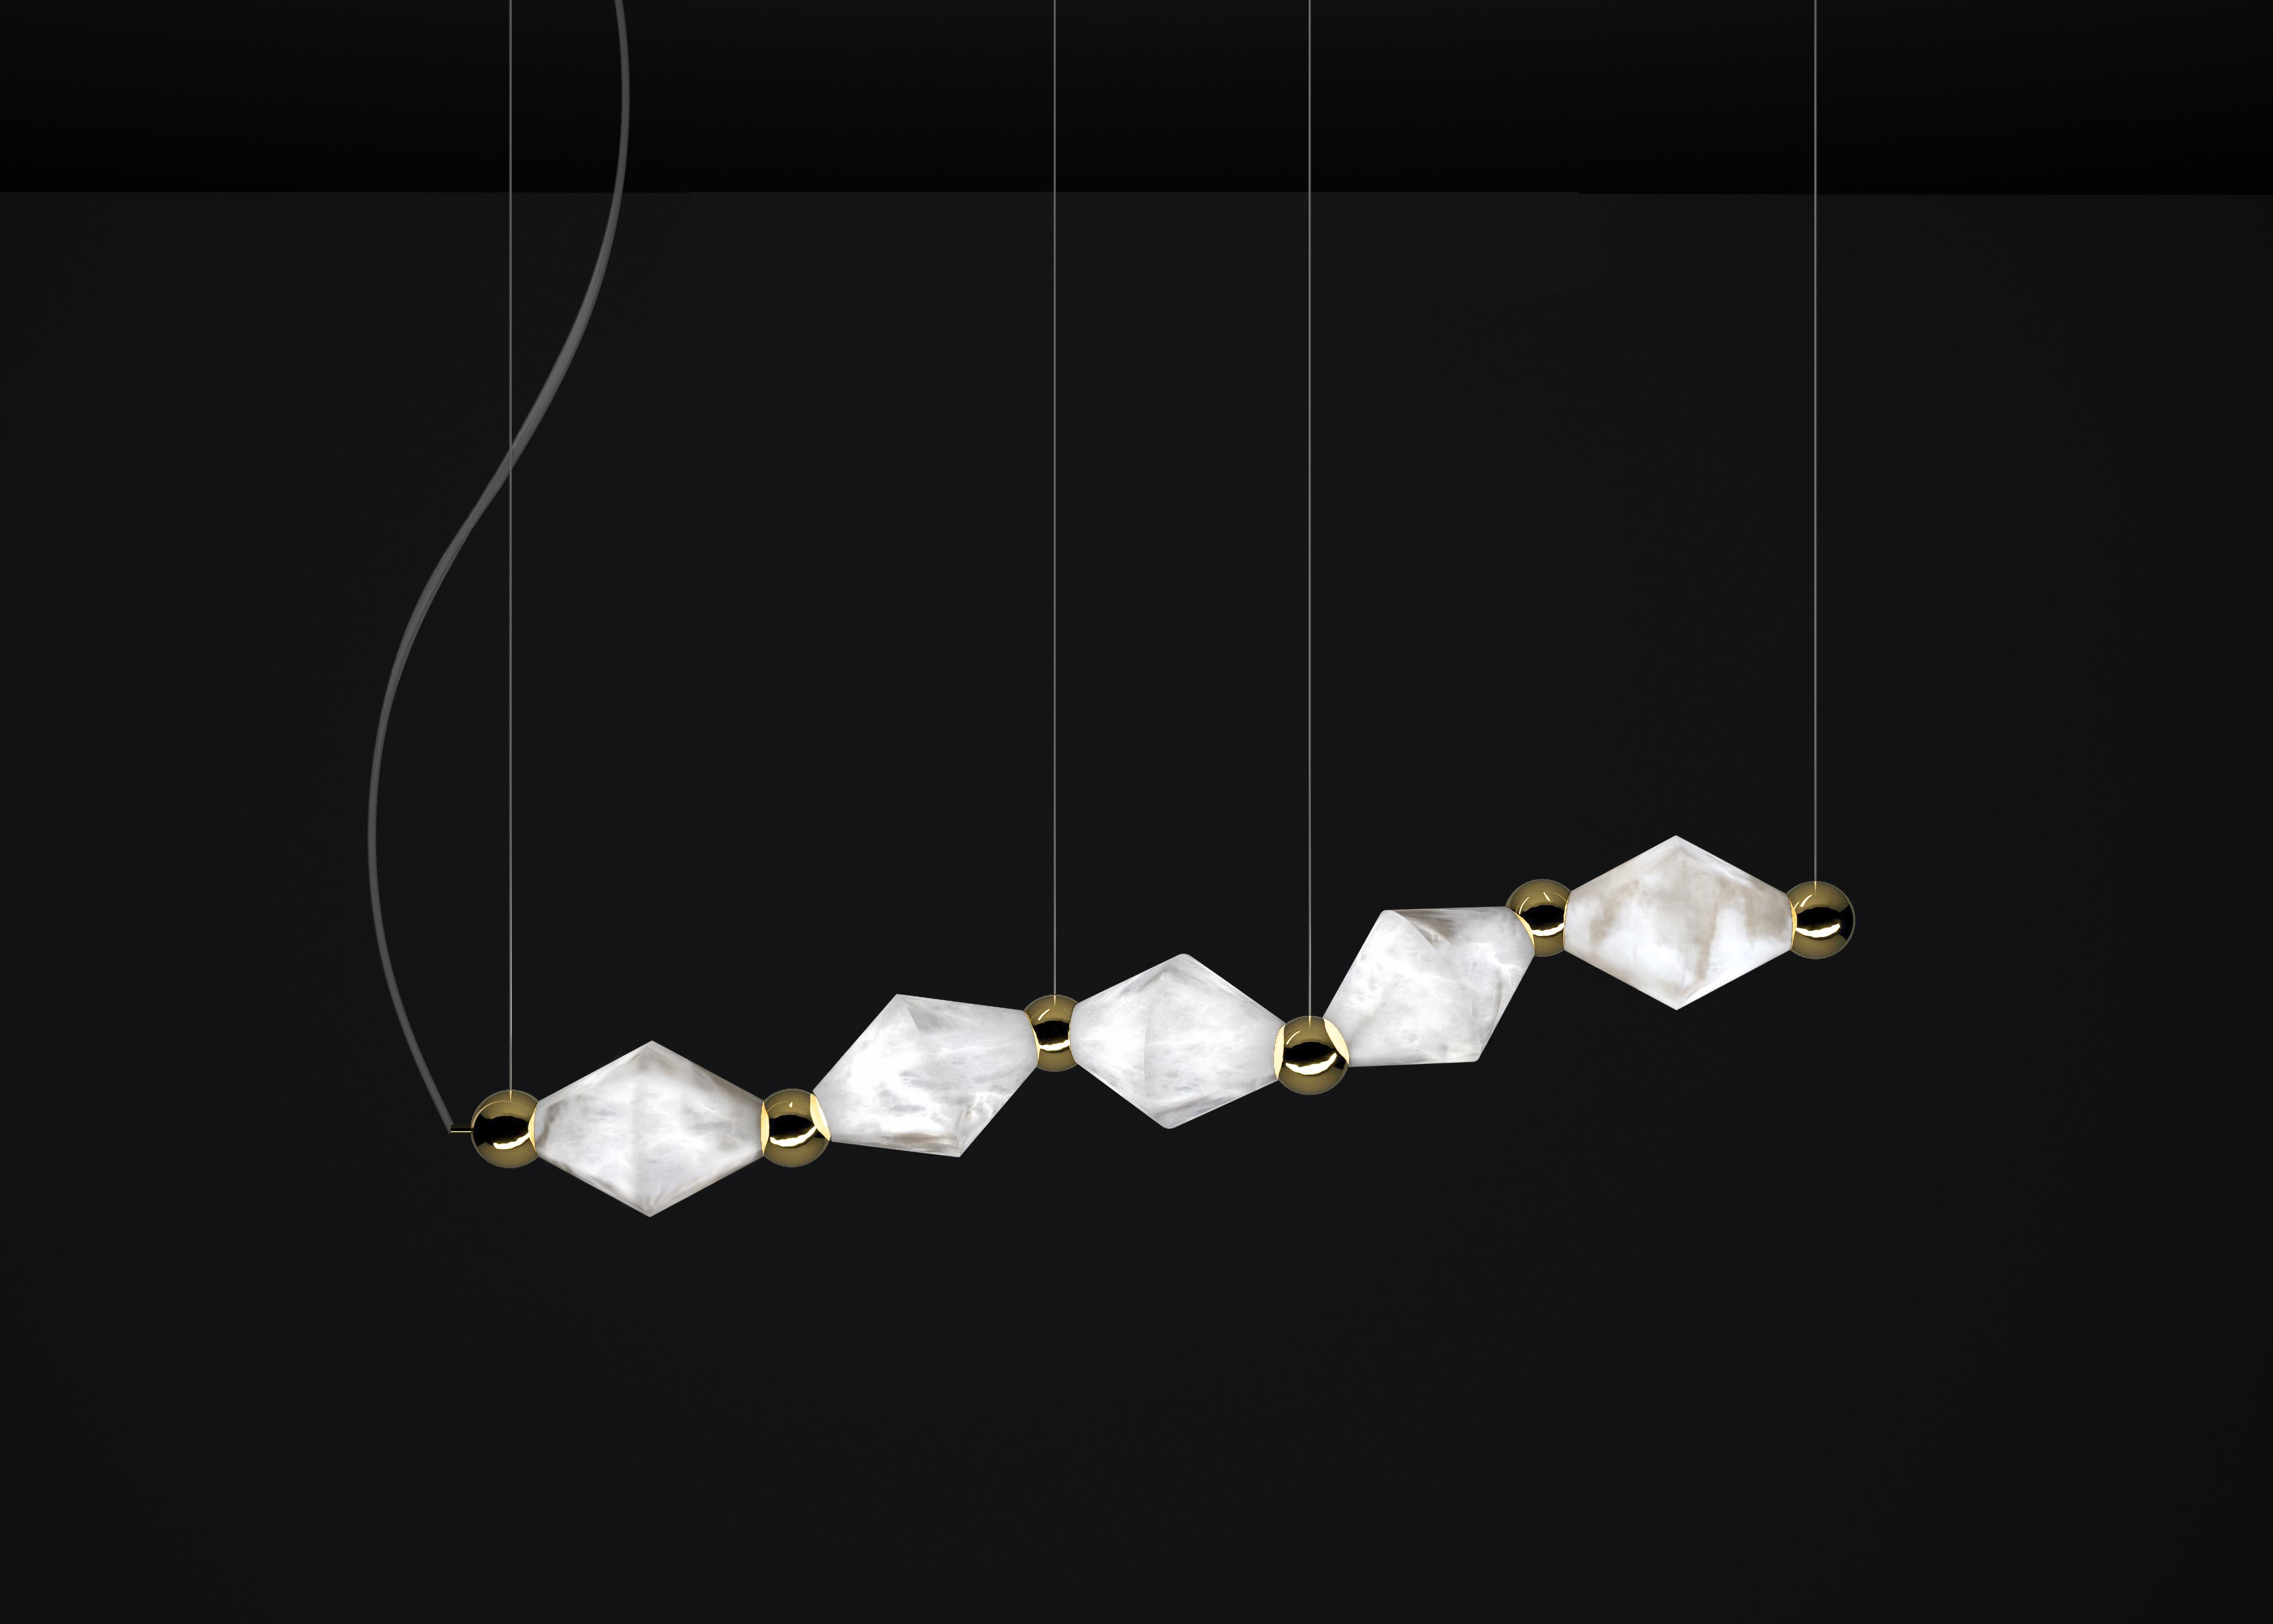 Chronos Shiny Gold Metal Pendant Lamp by Alabastro Italiano
Dimensions: D 21 x W 142 x H 31 cm.
Materials: White alabaster and metal.

Available in different finishes: Shiny Silver, Bronze, Brushed Brass, Ruggine of Florence, Brushed Burnished,